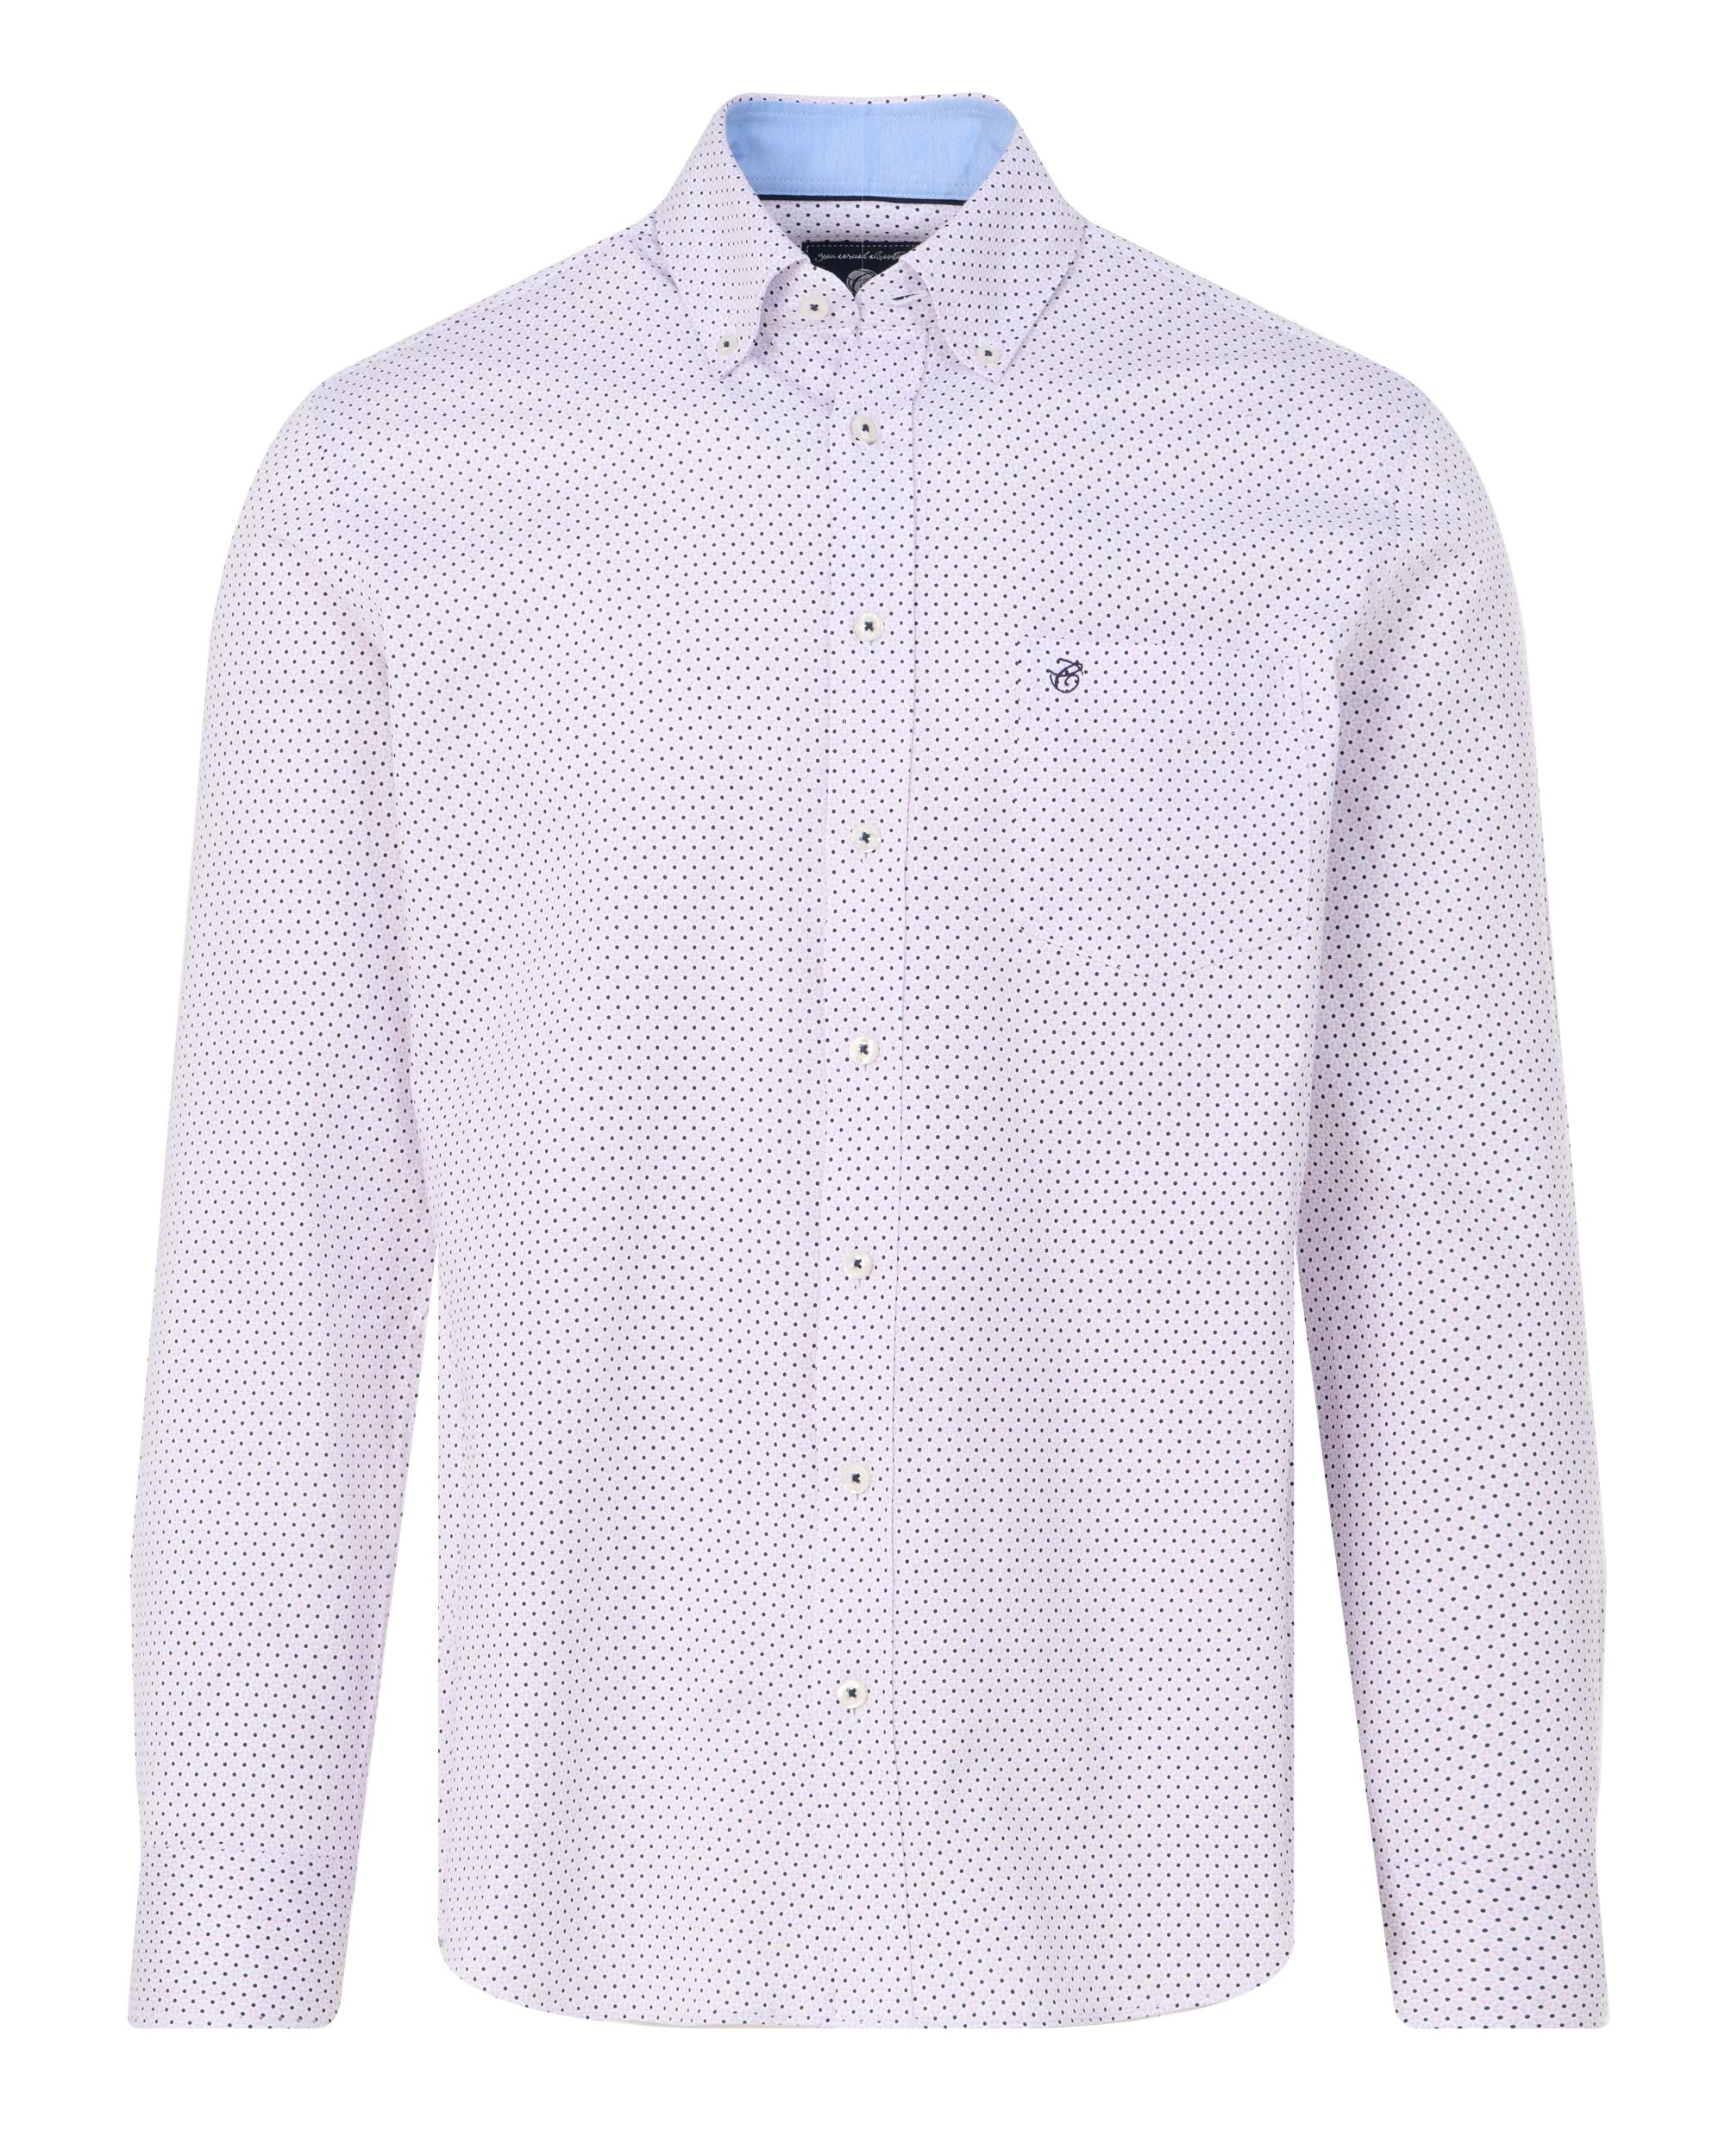 Campbell Casual Overhemd LM Lavender Frost dessin 088322-002-L